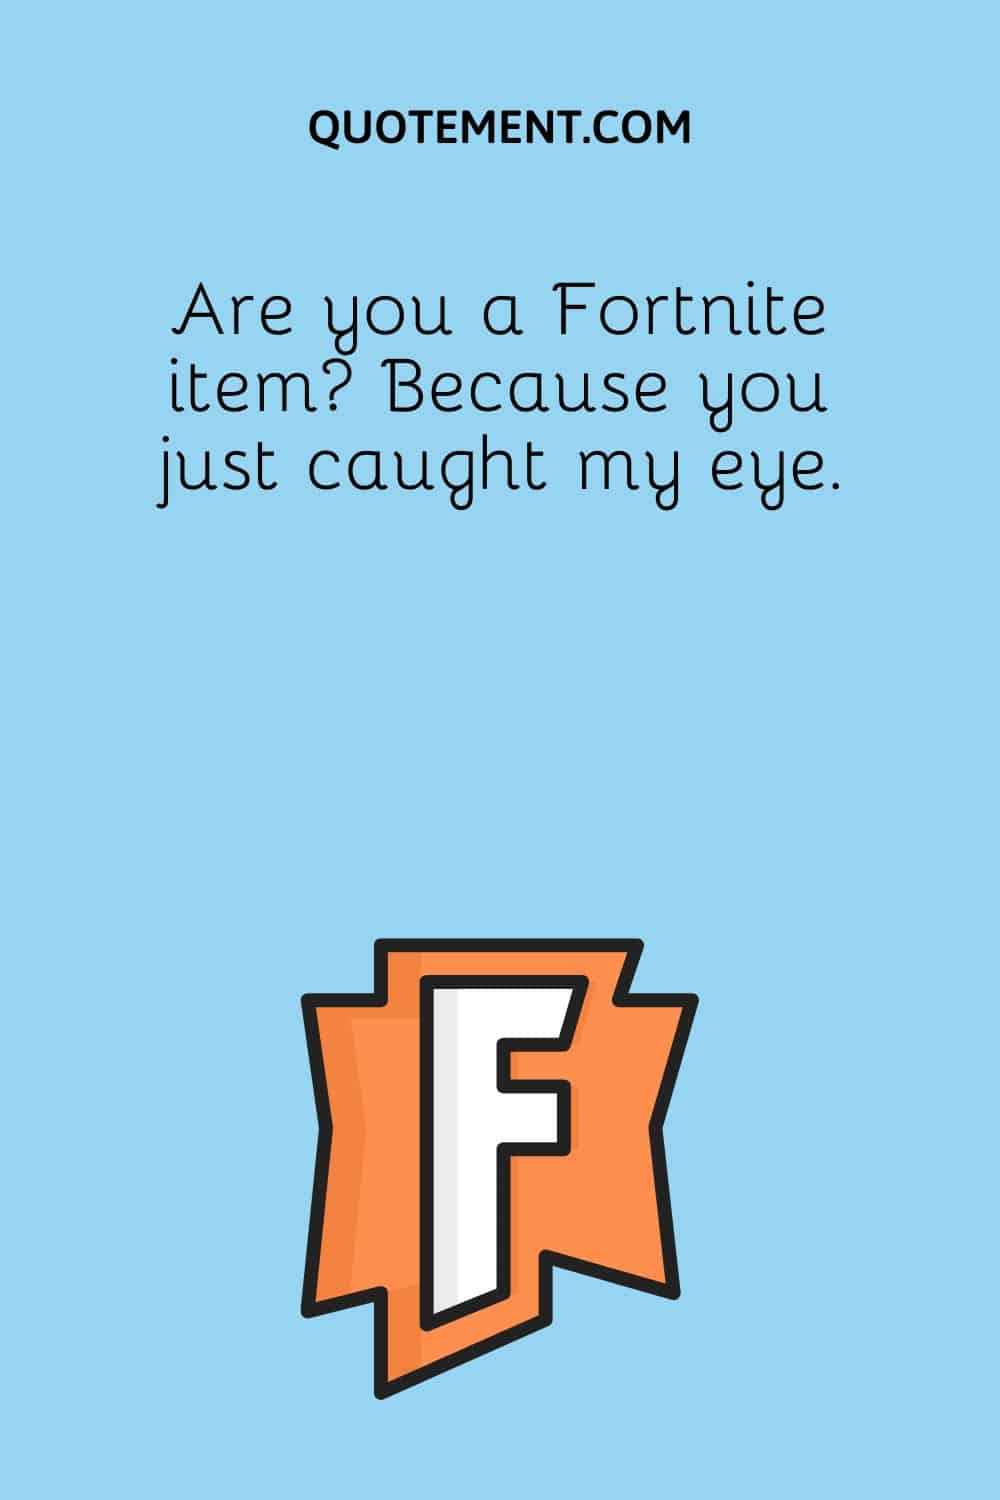 Are you a Fortnite item